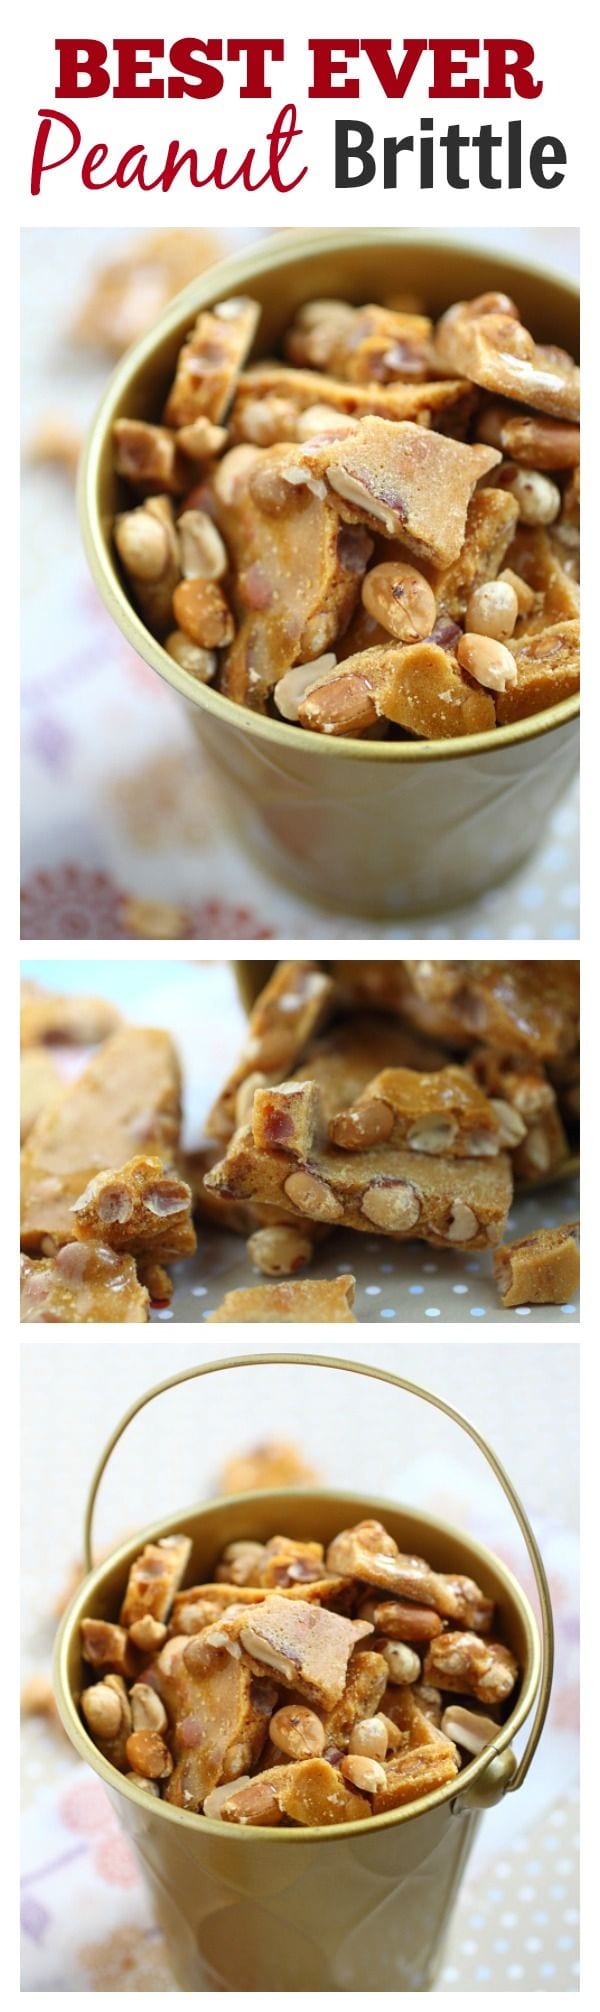 BEST-EVER Peanut Brittle - crispy, crunchy, loaded with peanuts. This amazing peanut brittle is a must-have for holidays | rasamalaysia.com